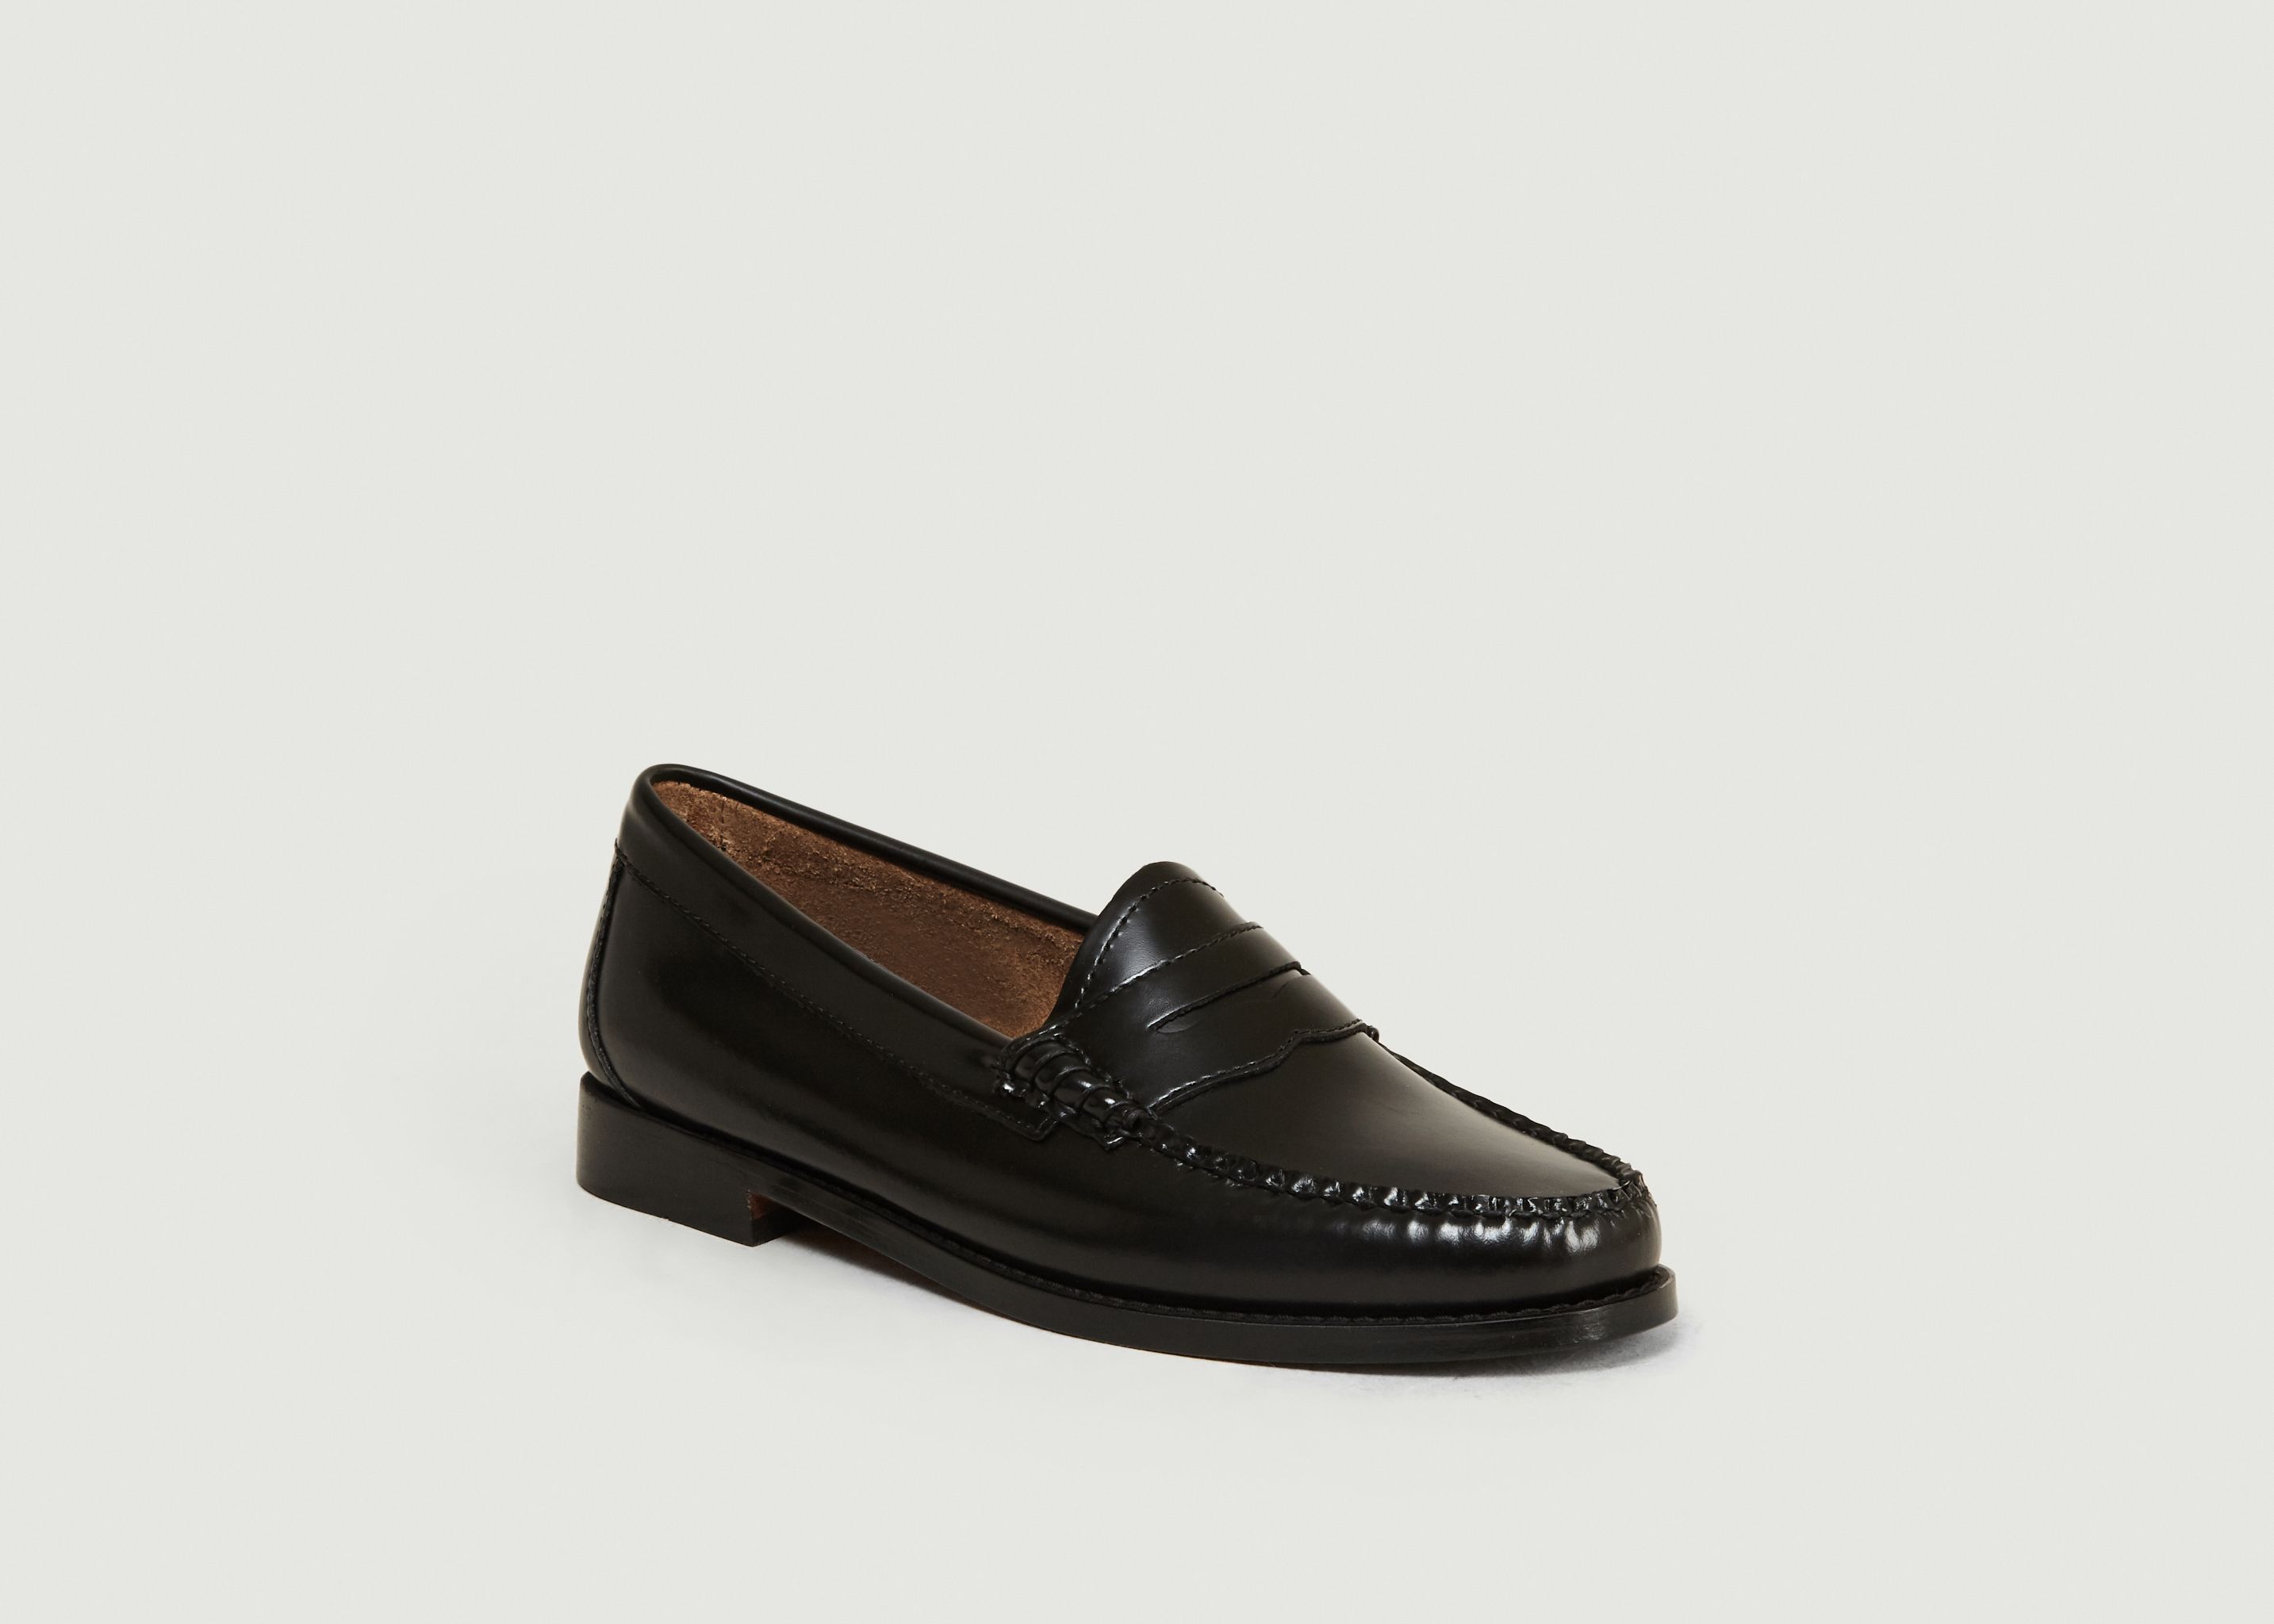 Weejuns Whitney Loafers - G.H.Bass